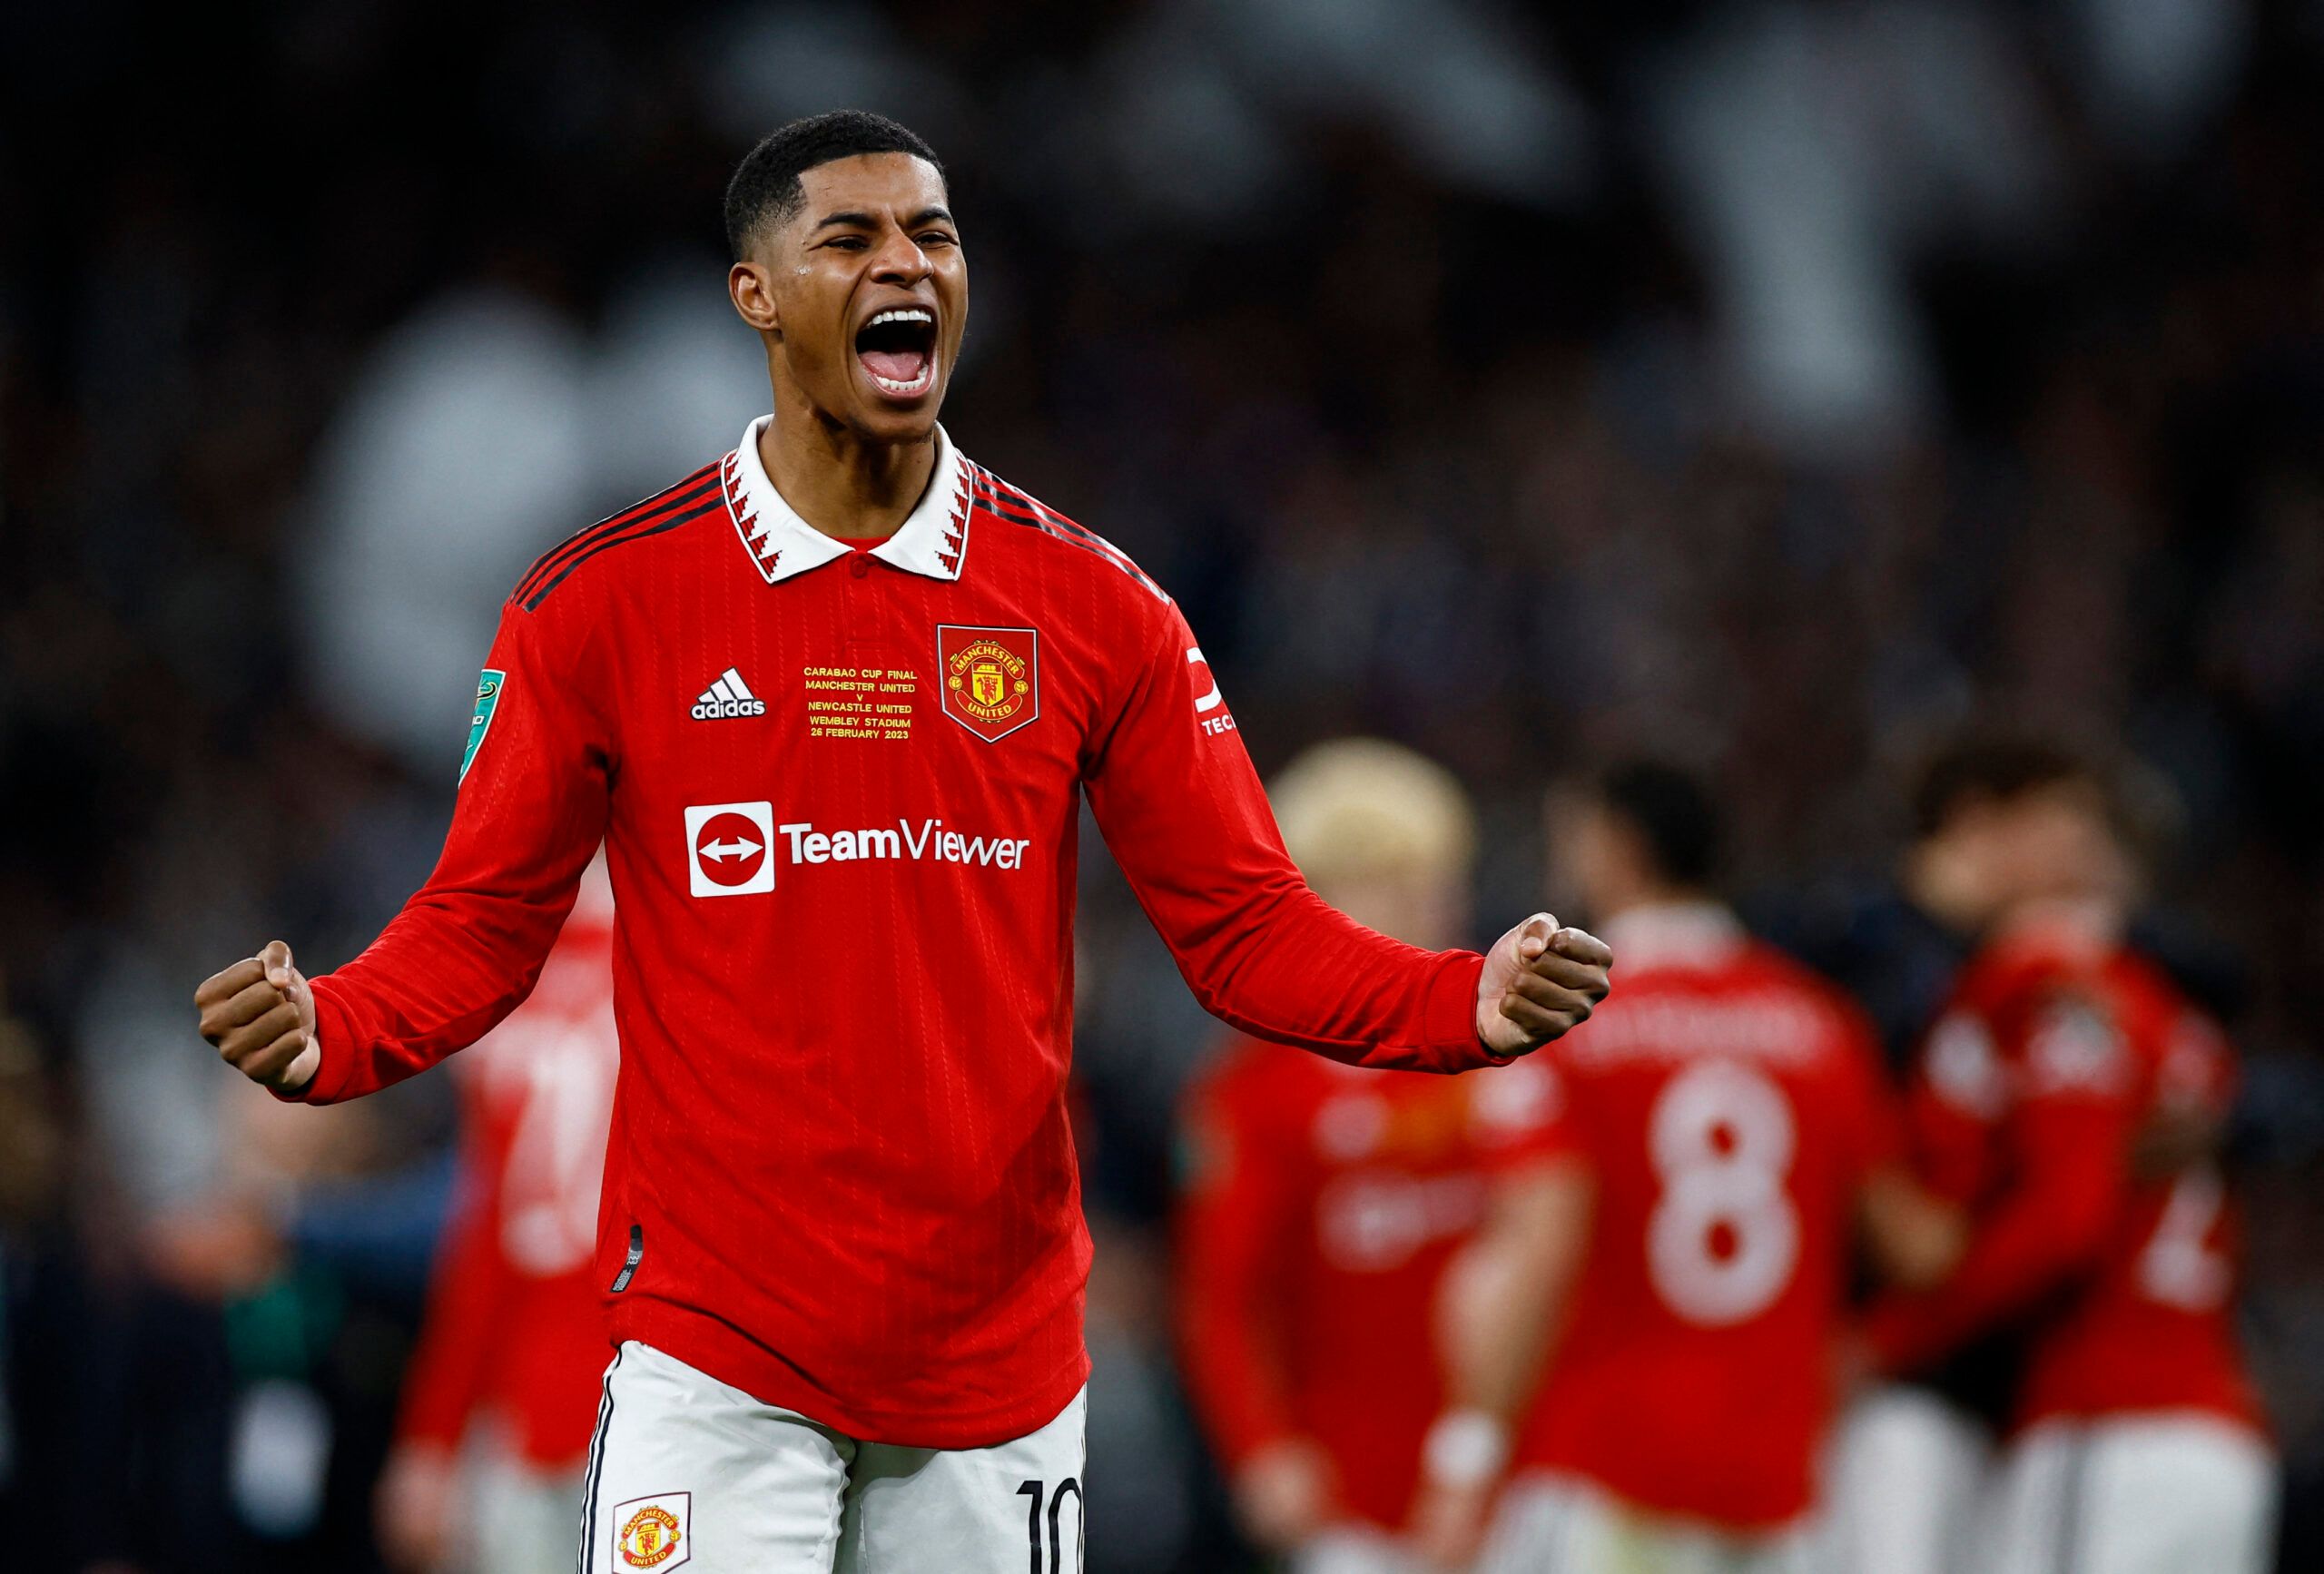 Soccer Football - Carabao Cup - Final - Manchester United v Newcastle United - Wembley Stadium, London, Britain - February 26, 2023  Manchester United's Marcus Rashford celebrates after winning the Carabao Cup final Action Images via Reuters/John Sibley EDITORIAL USE ONLY. No use with unauthorized audio, video, data, fixture lists, club/league logos or 'live' services. Online in-match use limited to 75 images, no video emulation. No use in betting, games or single club /league/player publication